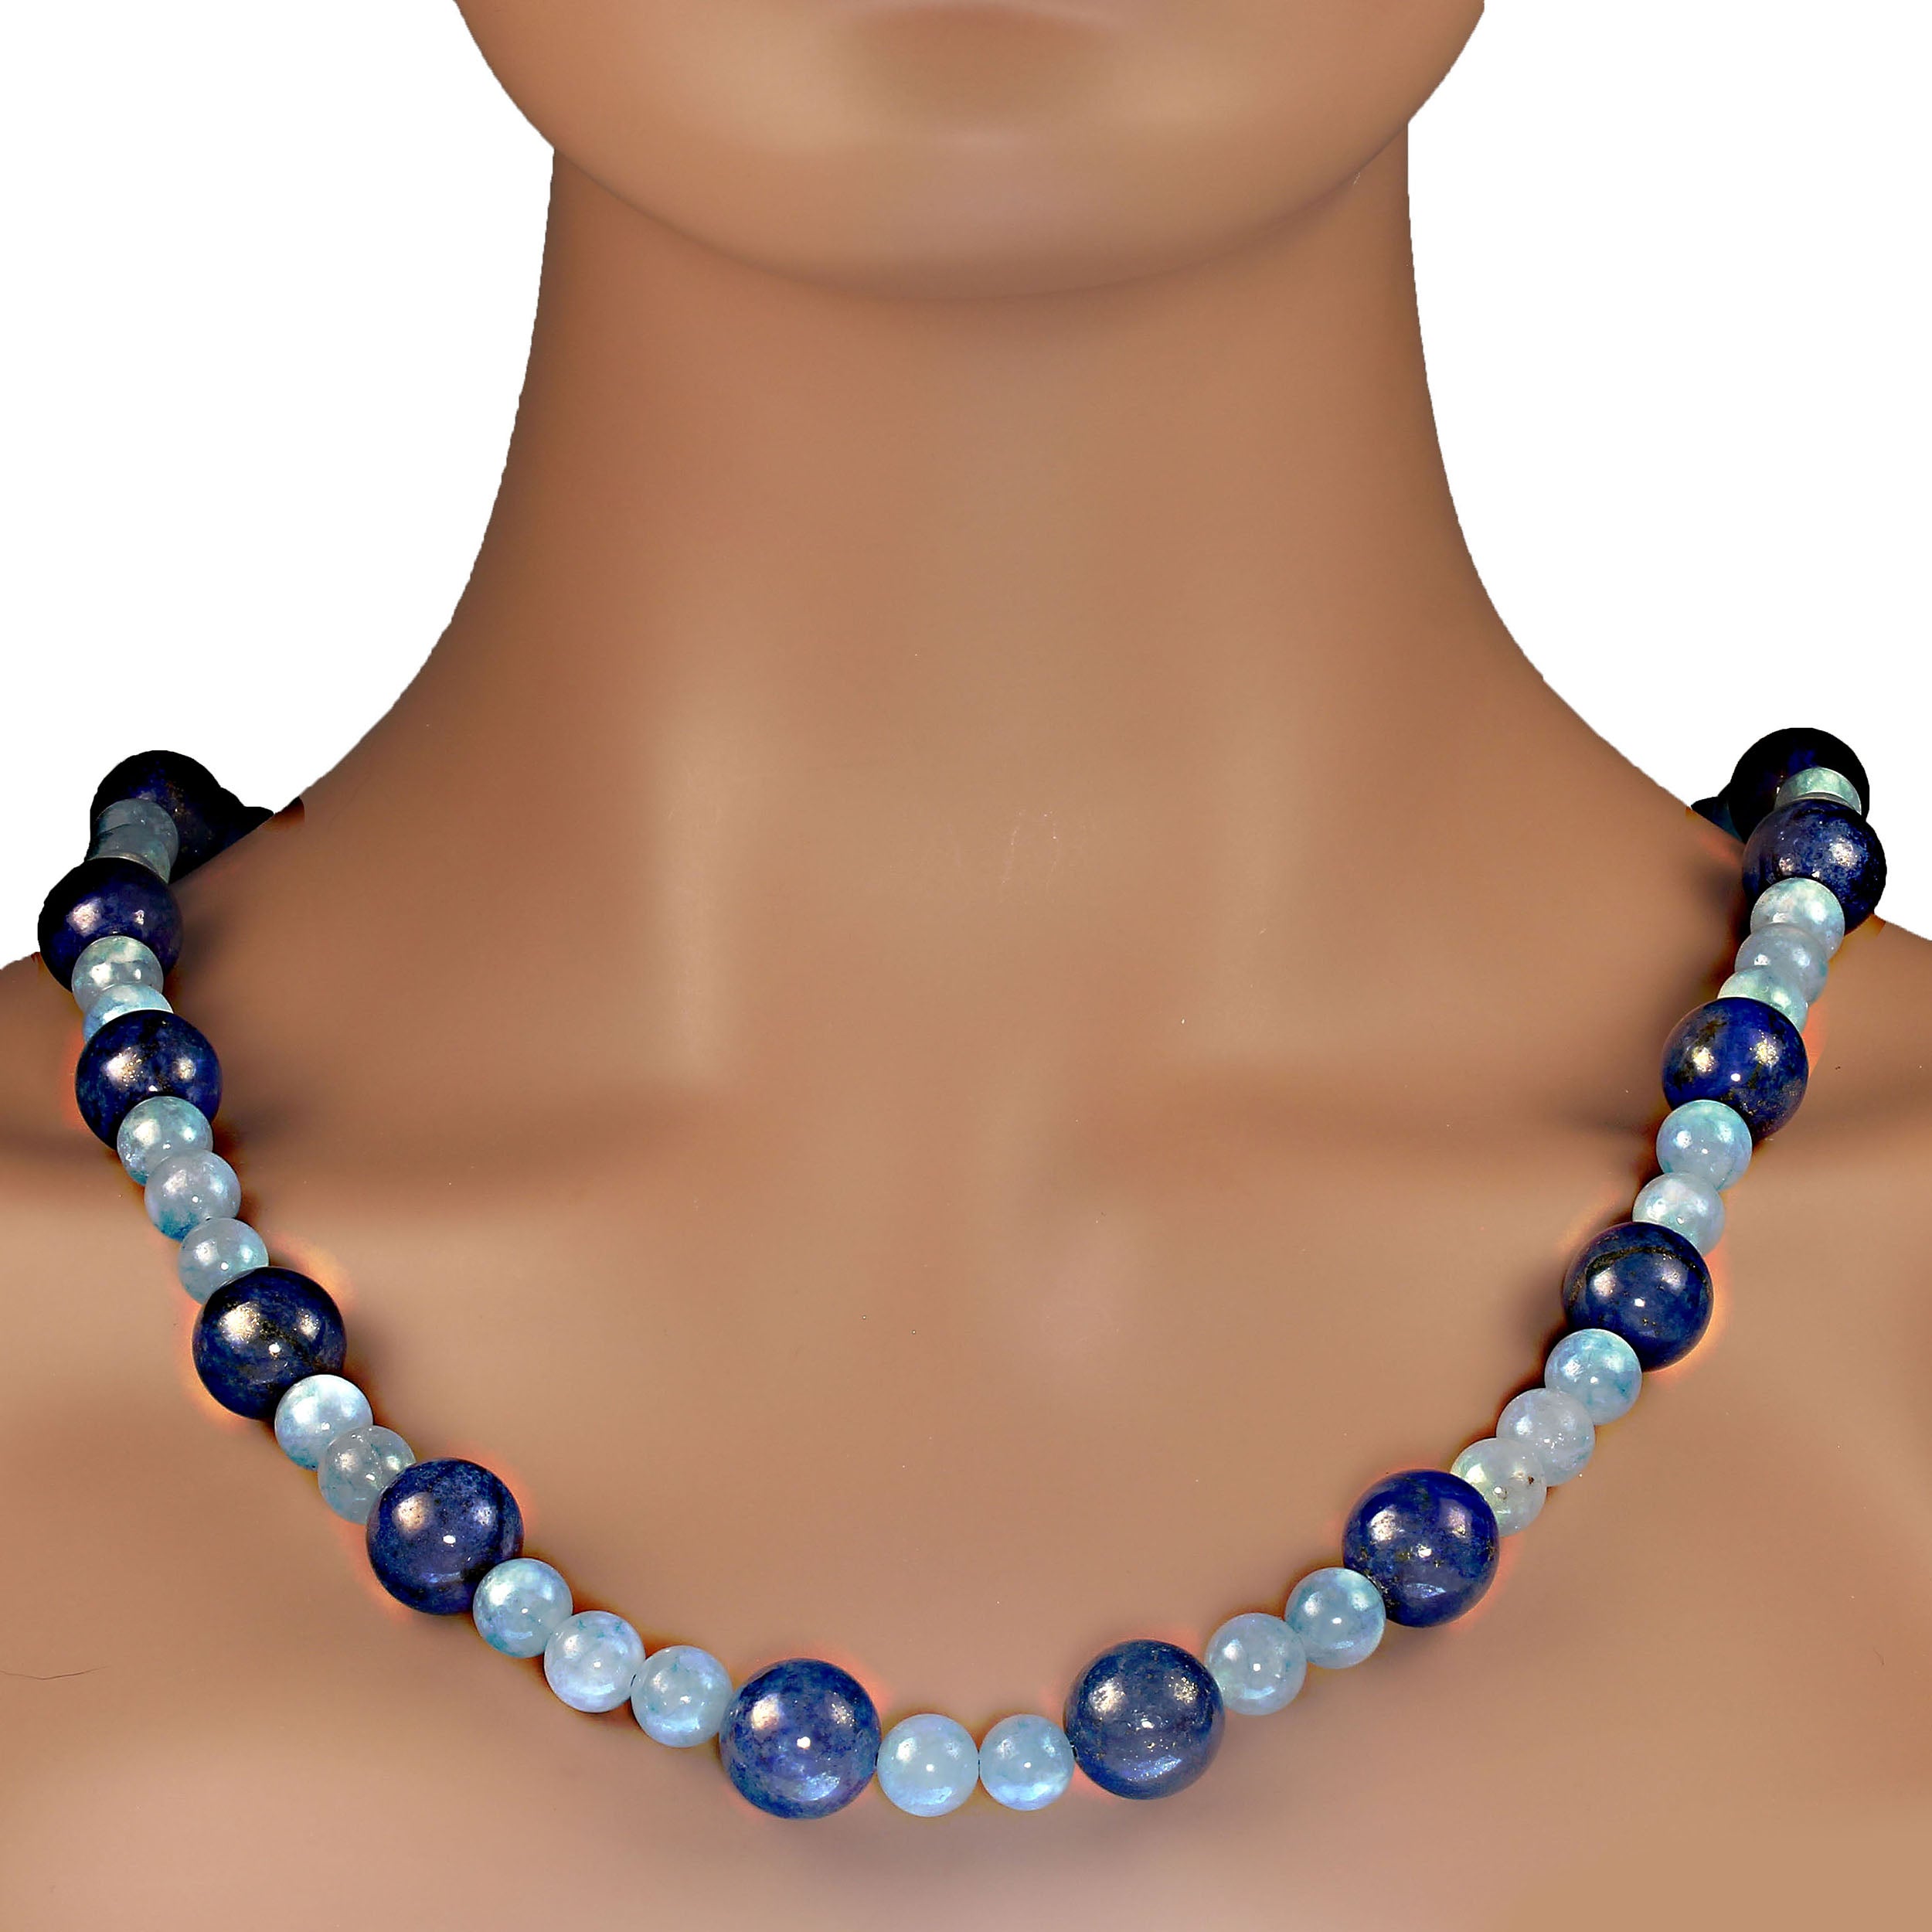 AJD Magnificent Lapis Lazuli and Aquamarine 27 Inch Statement Necklace   Gift!! For Sale